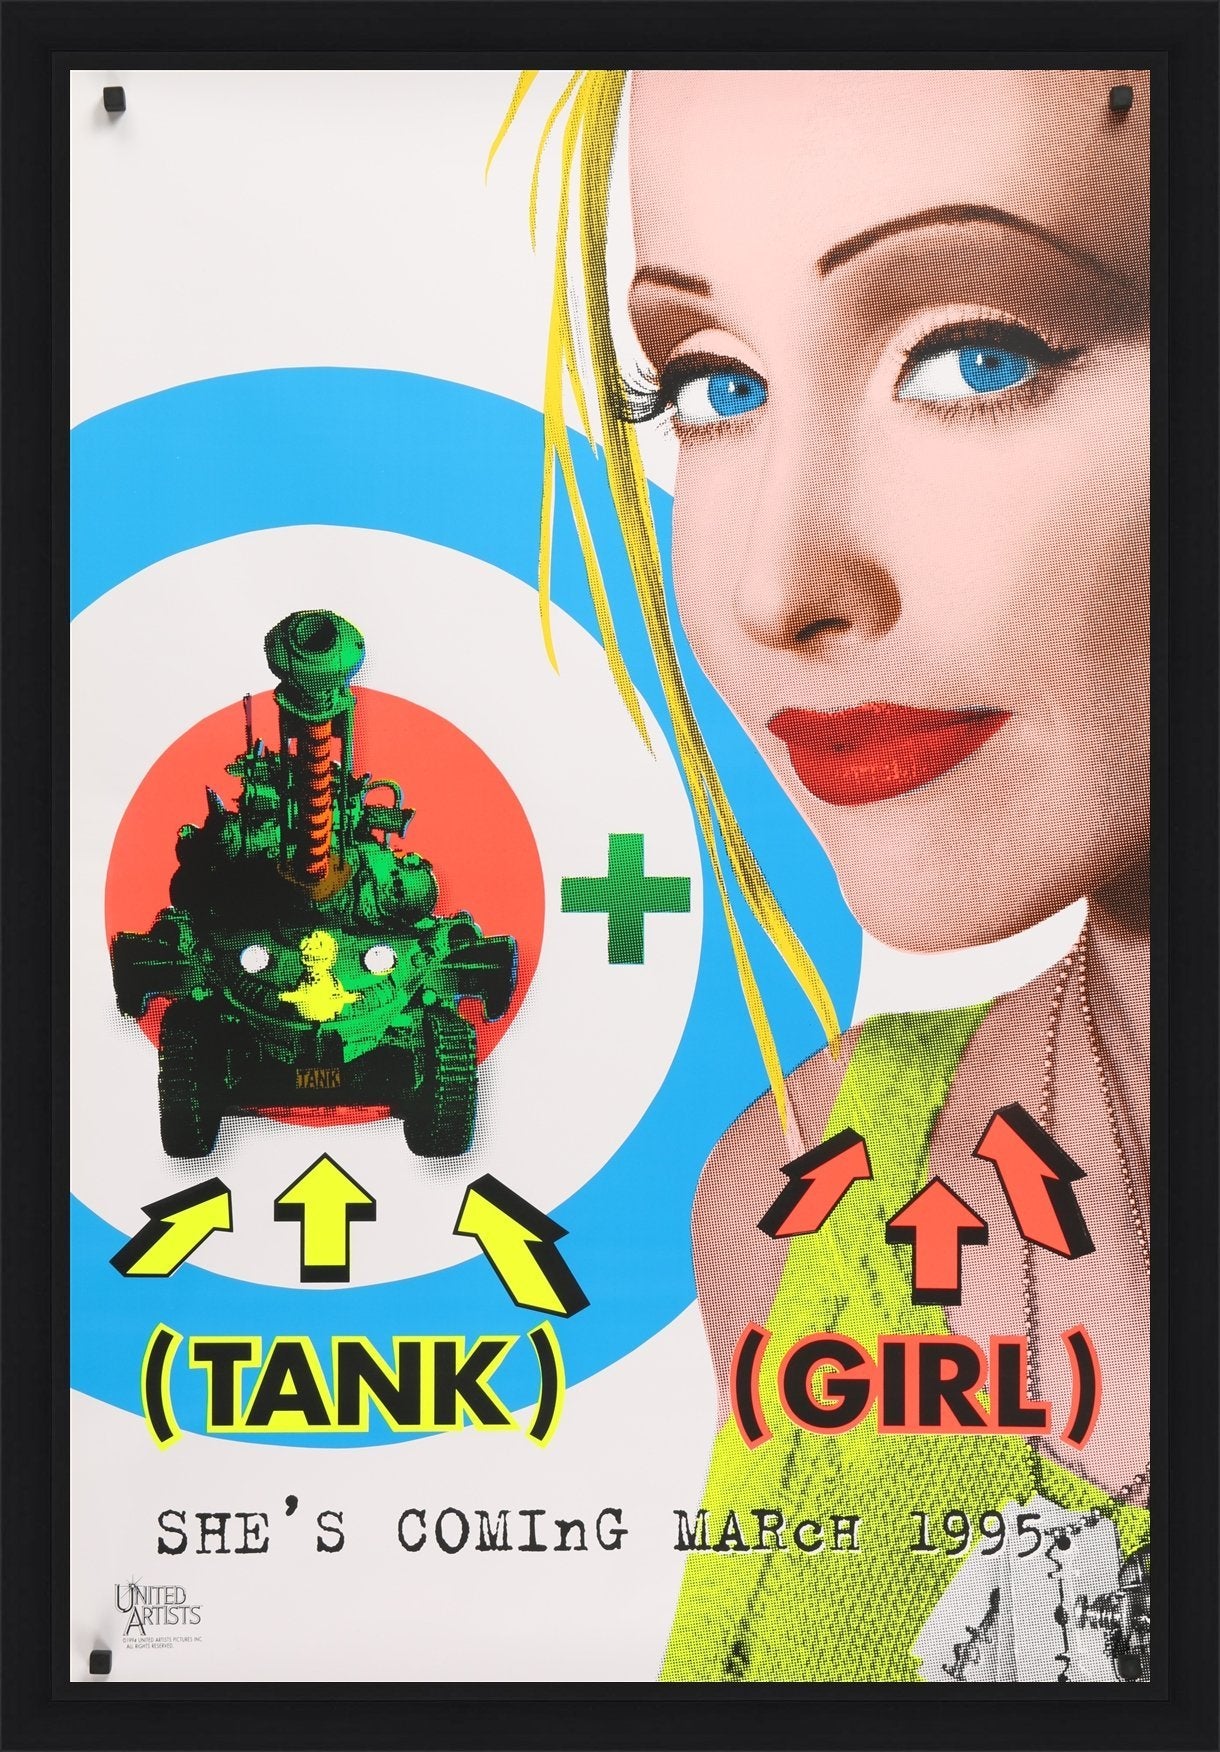 An original movie poster for the film Tank Girl